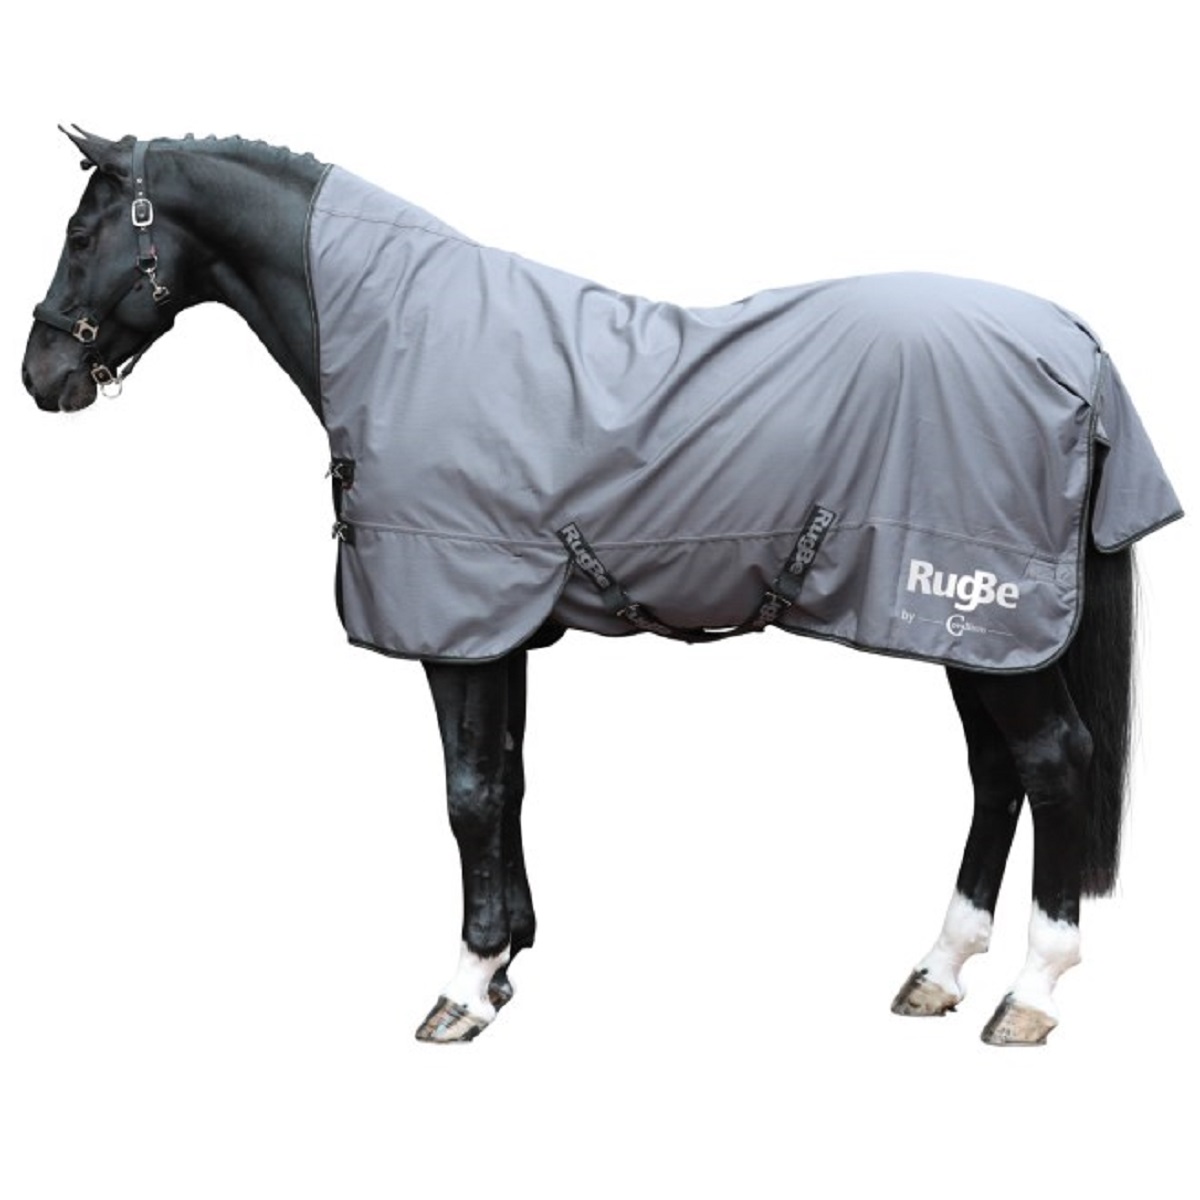 Covalliero Turnout Rug RugBe HighNeck